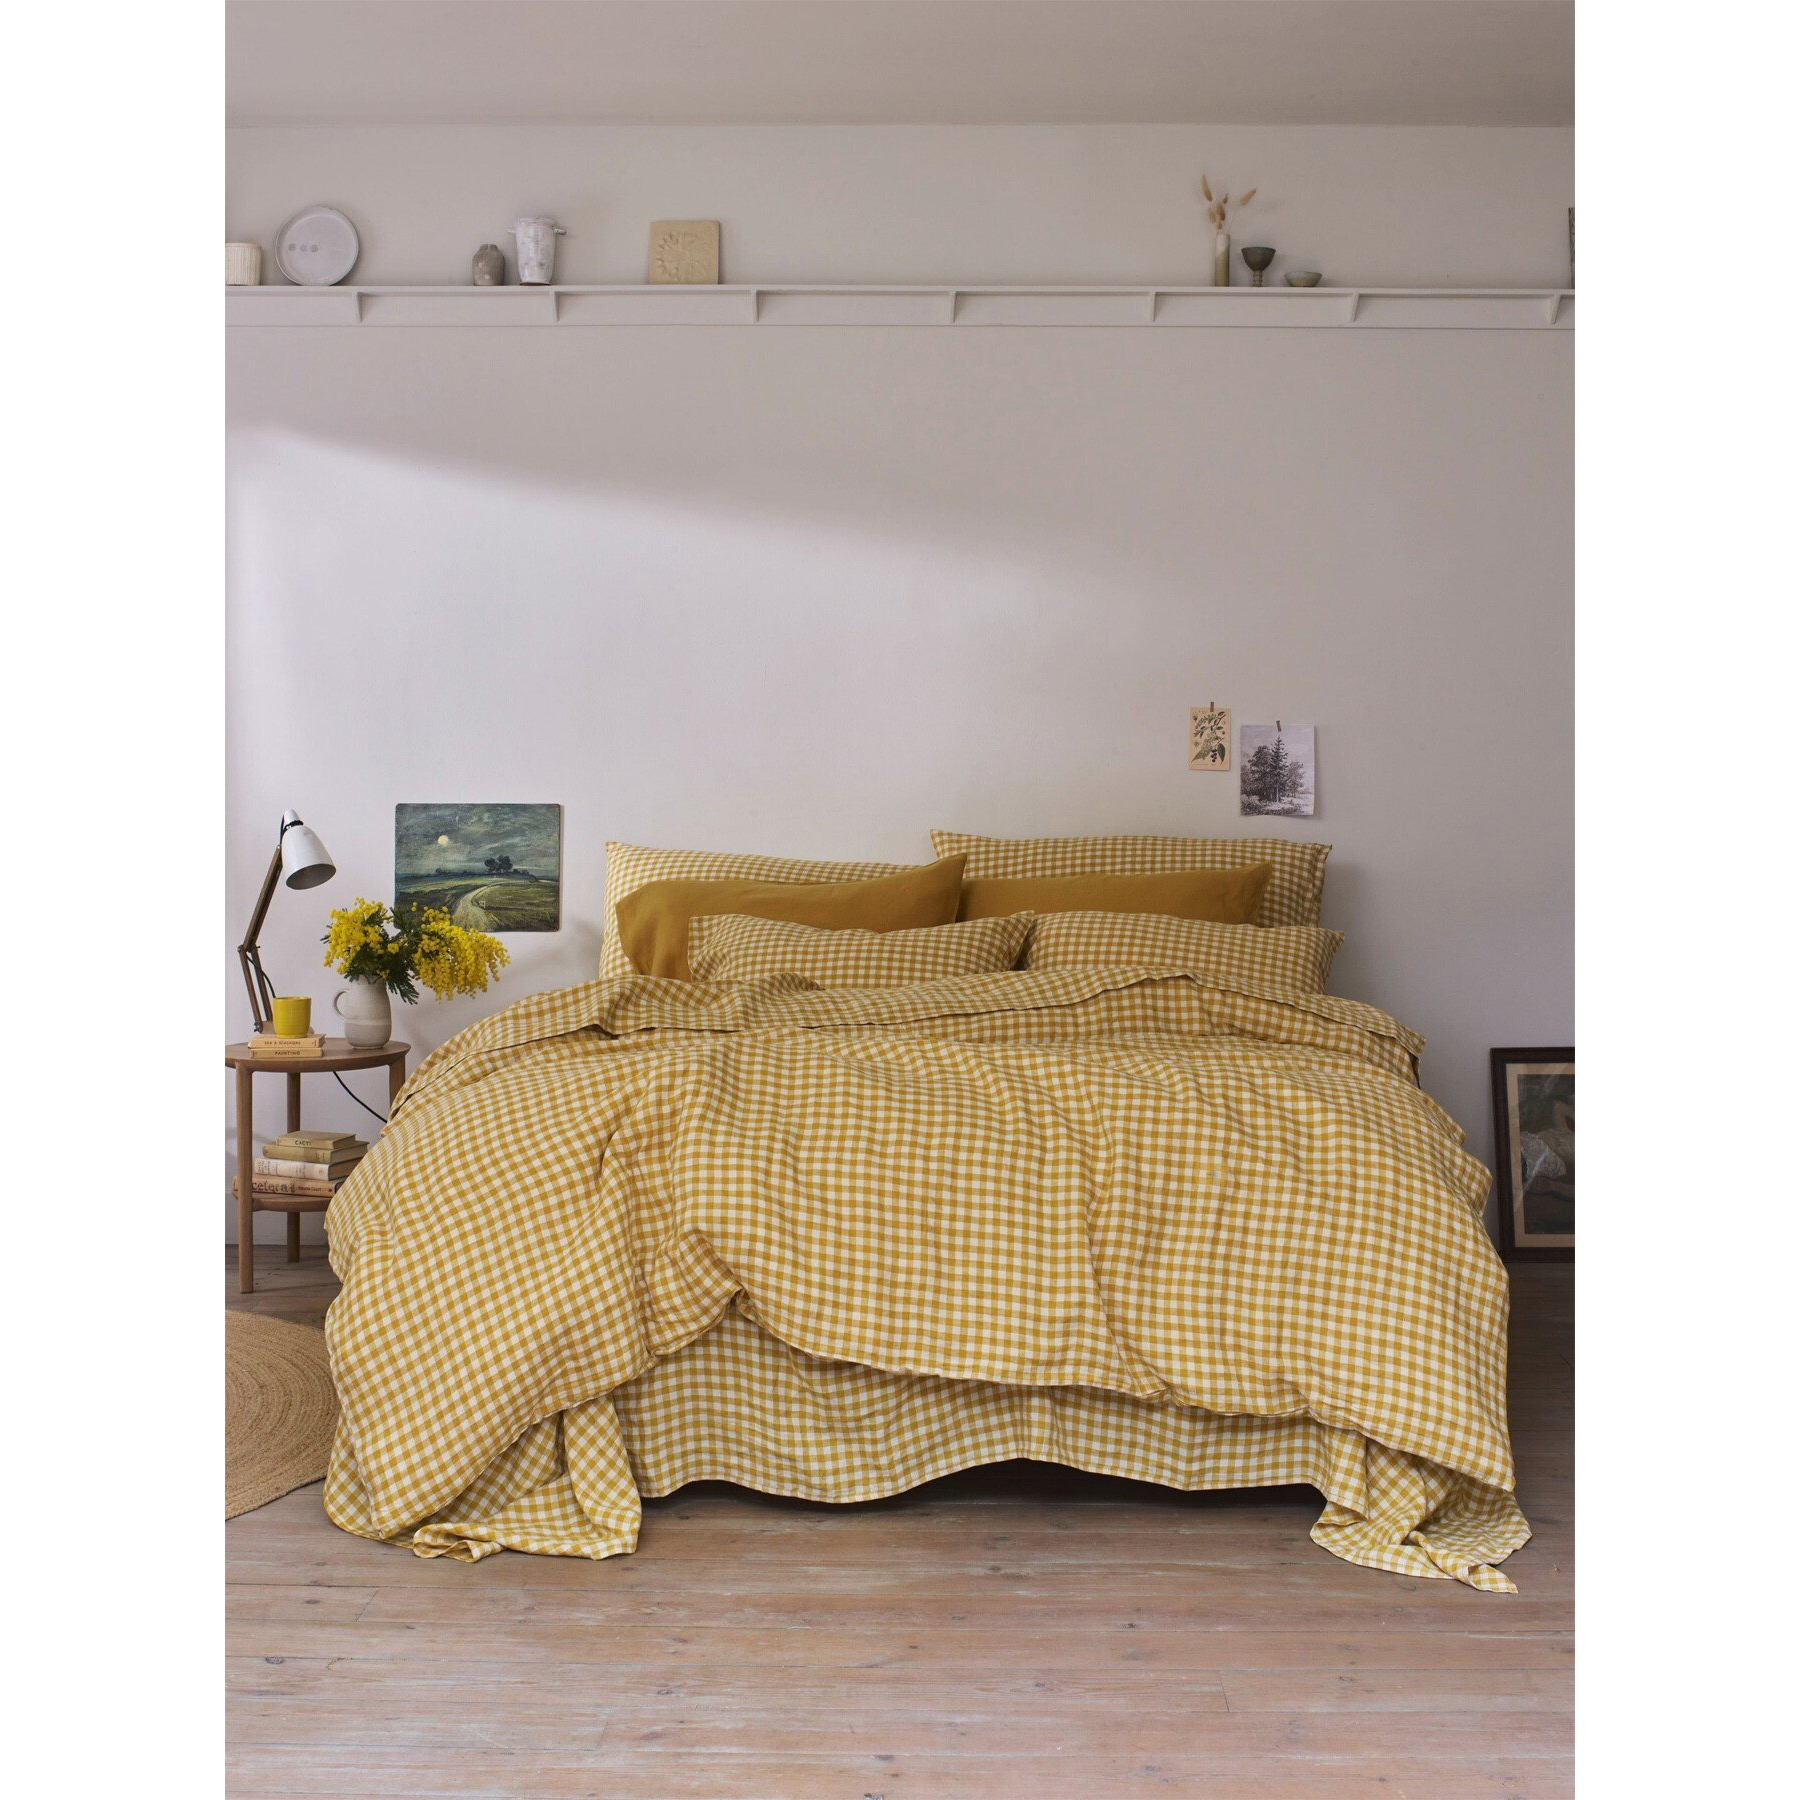 Piglet in Bed Gingham Linen Duvet Cover - Size King Yellow - image 1